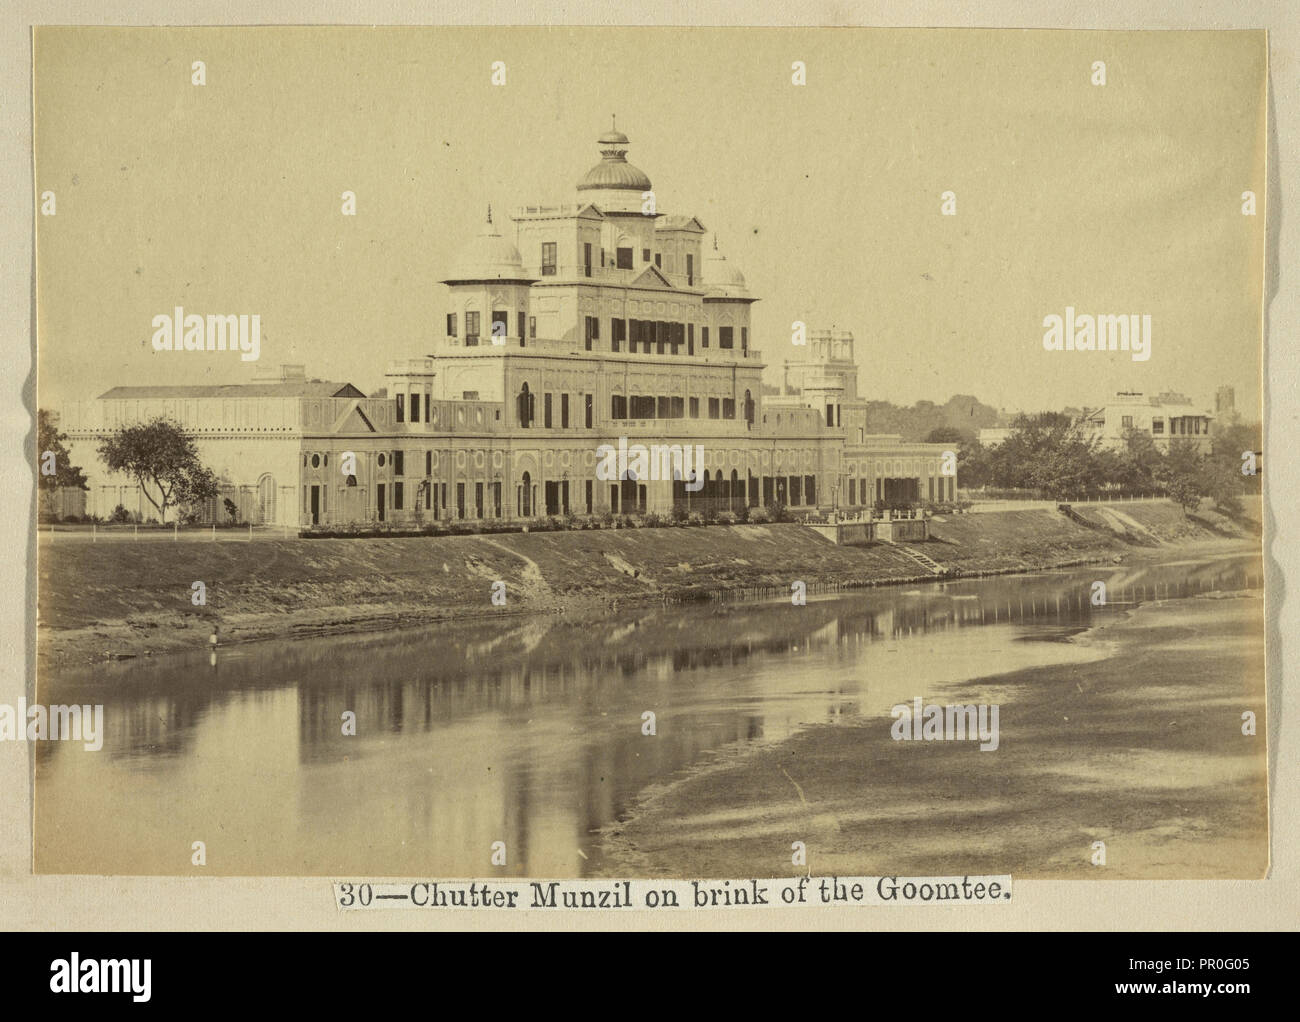 Chutter Munzil on brink of the Goomtee, The Lucknow album: containing a series of fifty photographic views of Lucknow Stock Photo